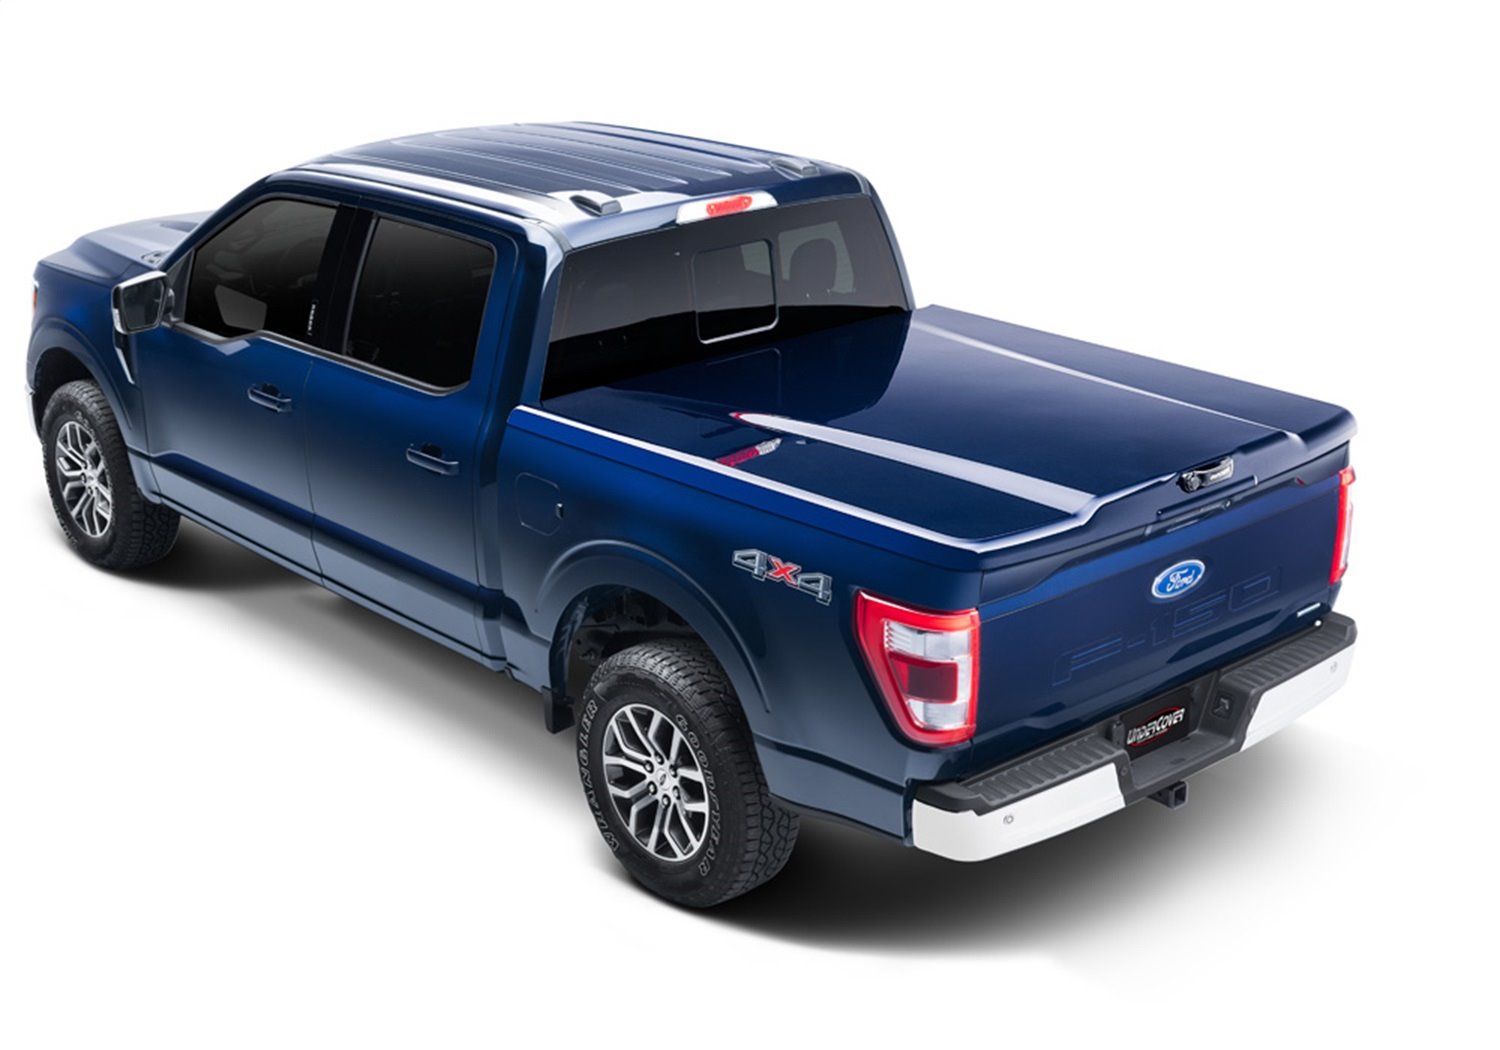 UC2208L-D4 Elite LX Hard Non-Folding Cover, Fits Select Ford F-150 5'7" Bed Crew (Includes Lightning) D4 Lucid Red Pearl